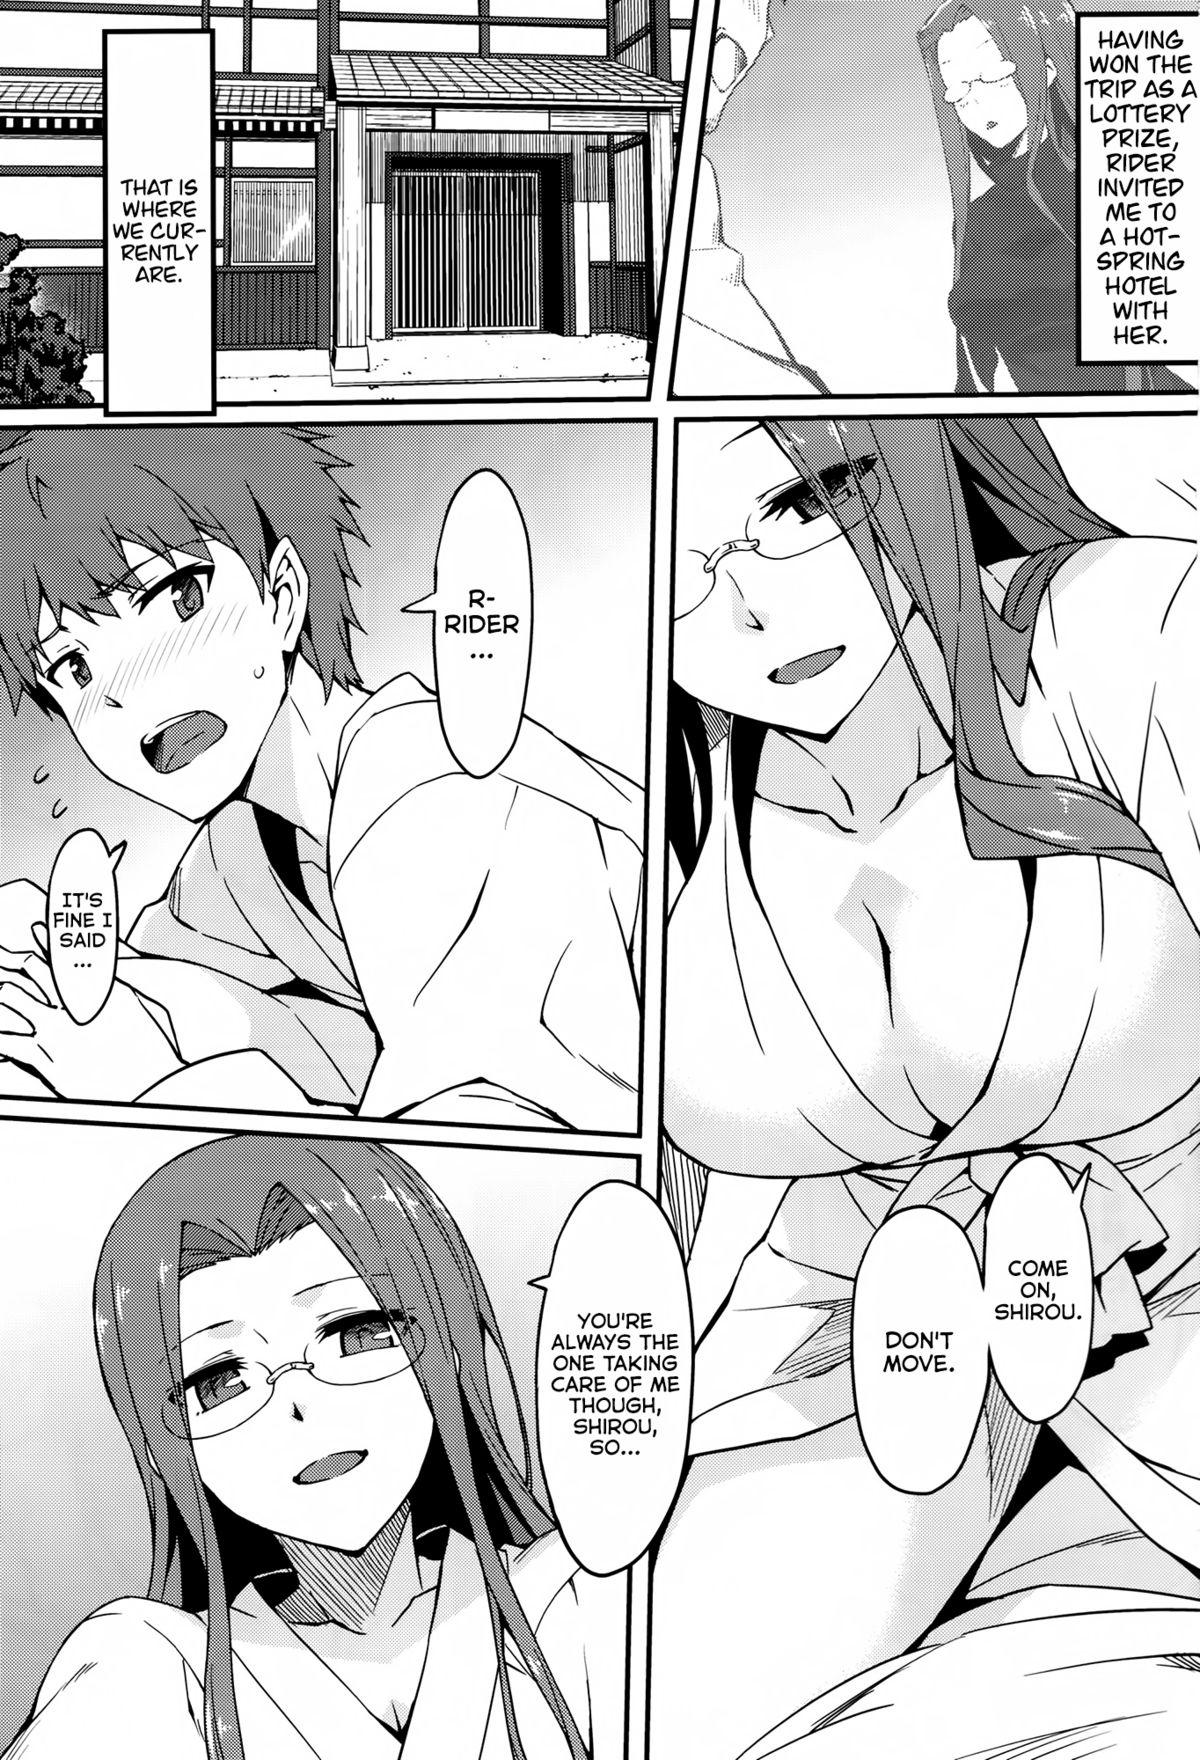 (C88) [S.S.L (Yanagi)] Rider-san to Onsen Yado. Sonogo | Hot Spring Inn With Rider-san. After Story (Fate/stay night) [English] [Facedesk] 2